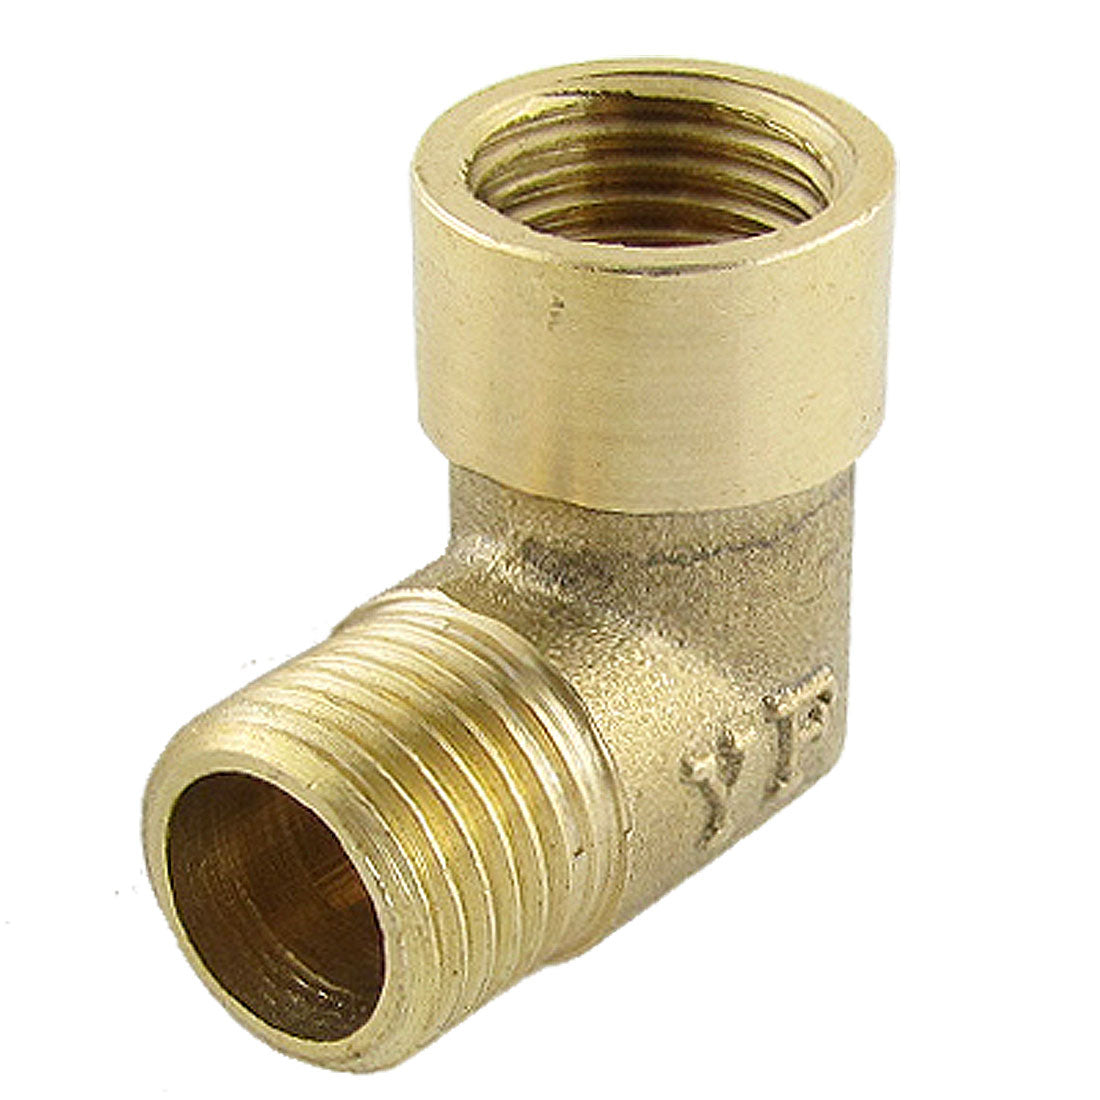 uxcell Uxcell Gold Tone Brass Pipe Fitting Street Elbow Connector 1/4BSP Female x 1/4BSP Male